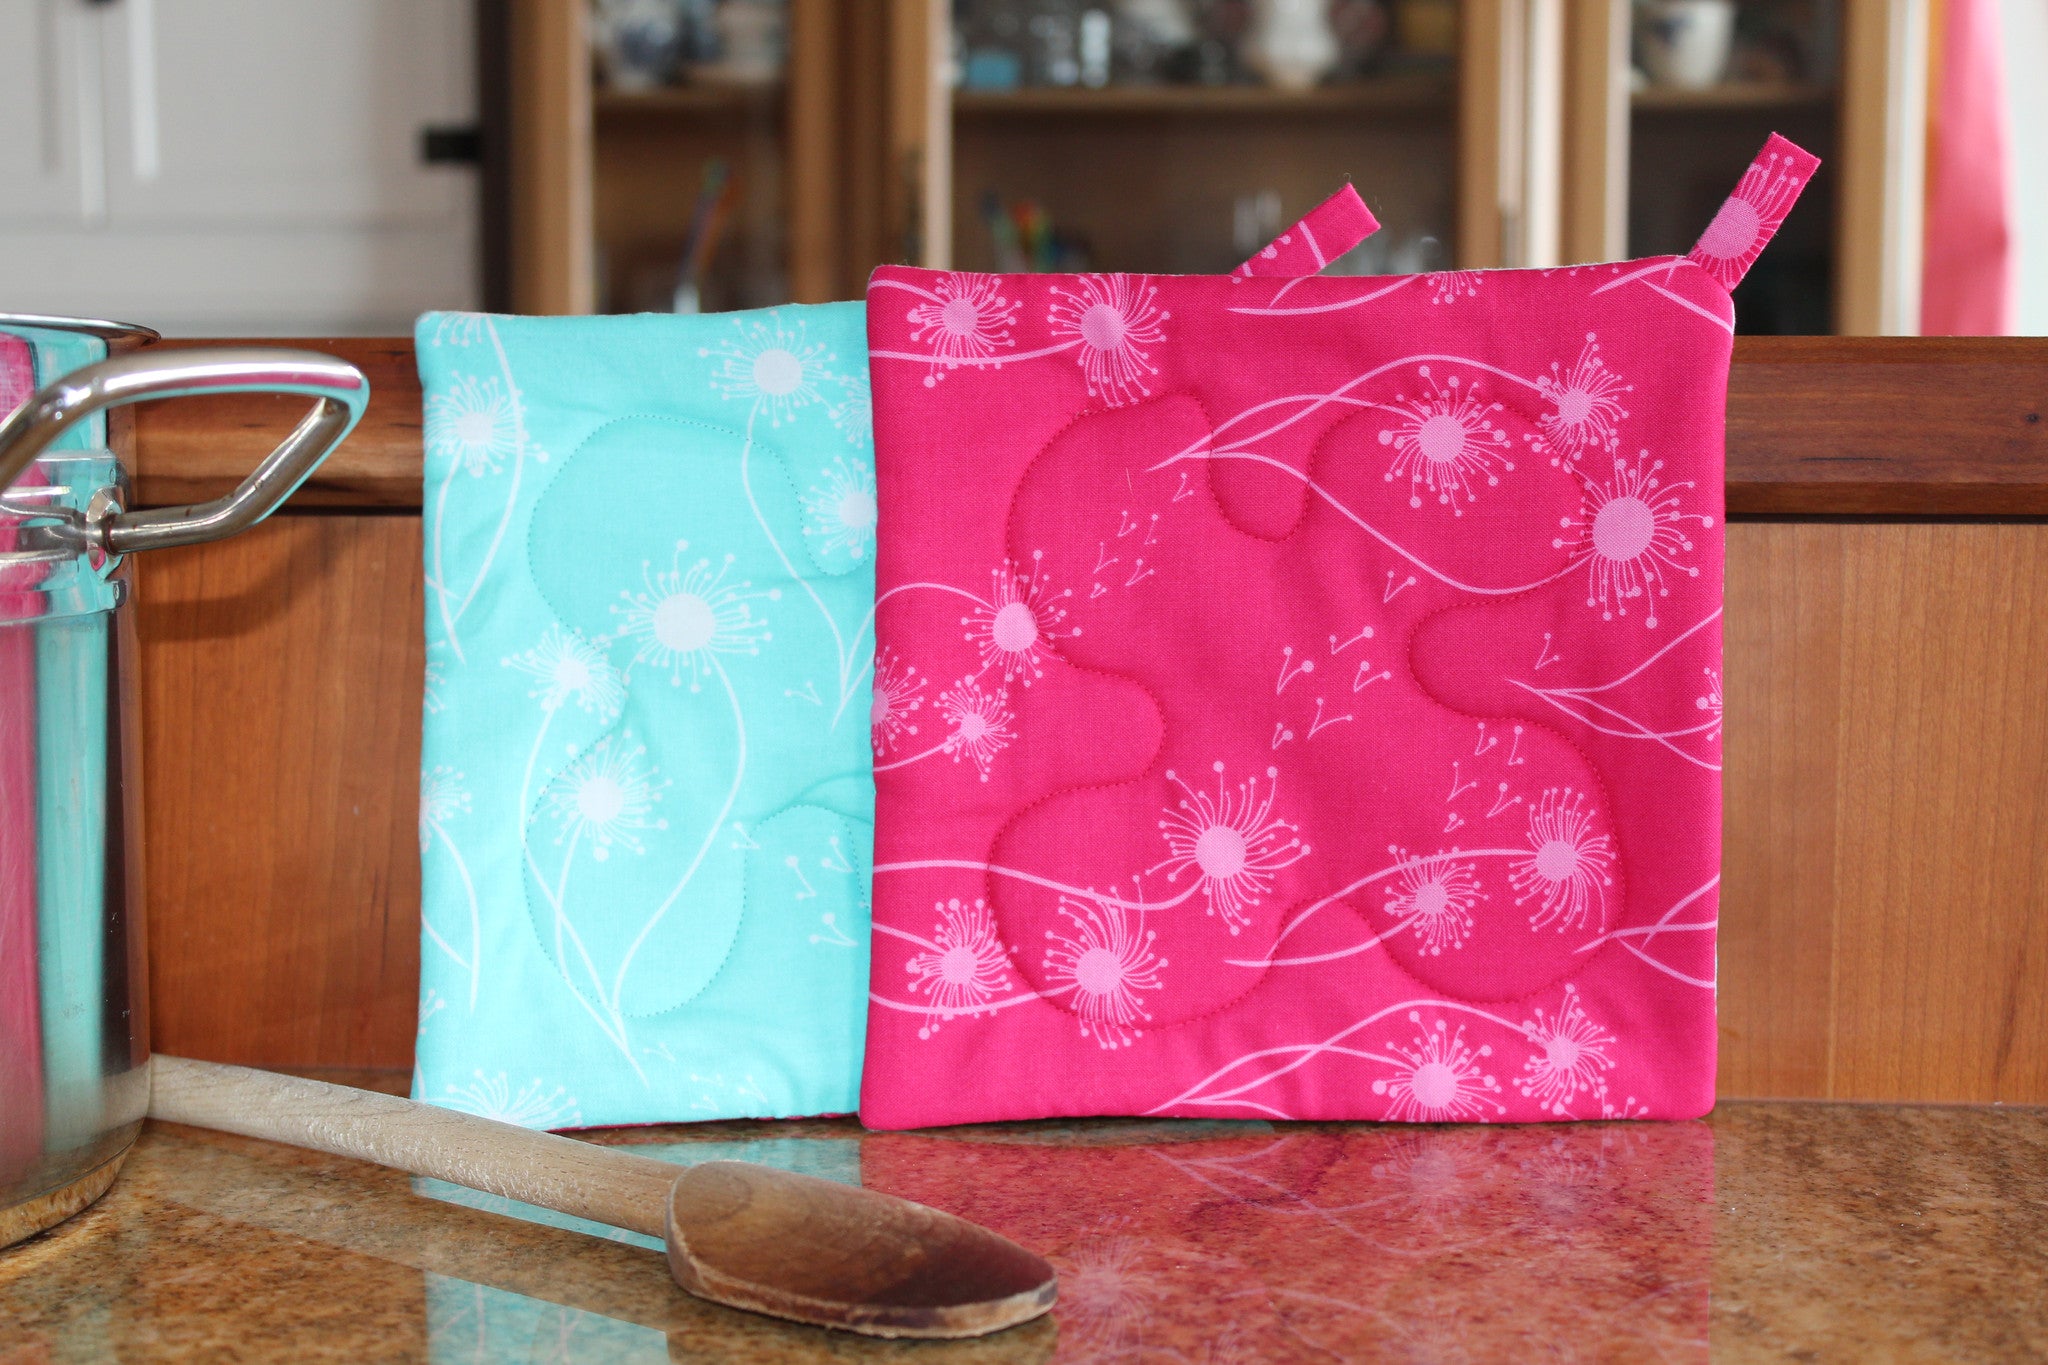 Spring into Summer Dandelions Potholder-The Blue Peony-Category_Pot Holder,Color_Aqua,Color_Pink,Department_Kitchen,Pattern_Floral,Size_Traditional (Square),Theme_Spring,Theme_Summer